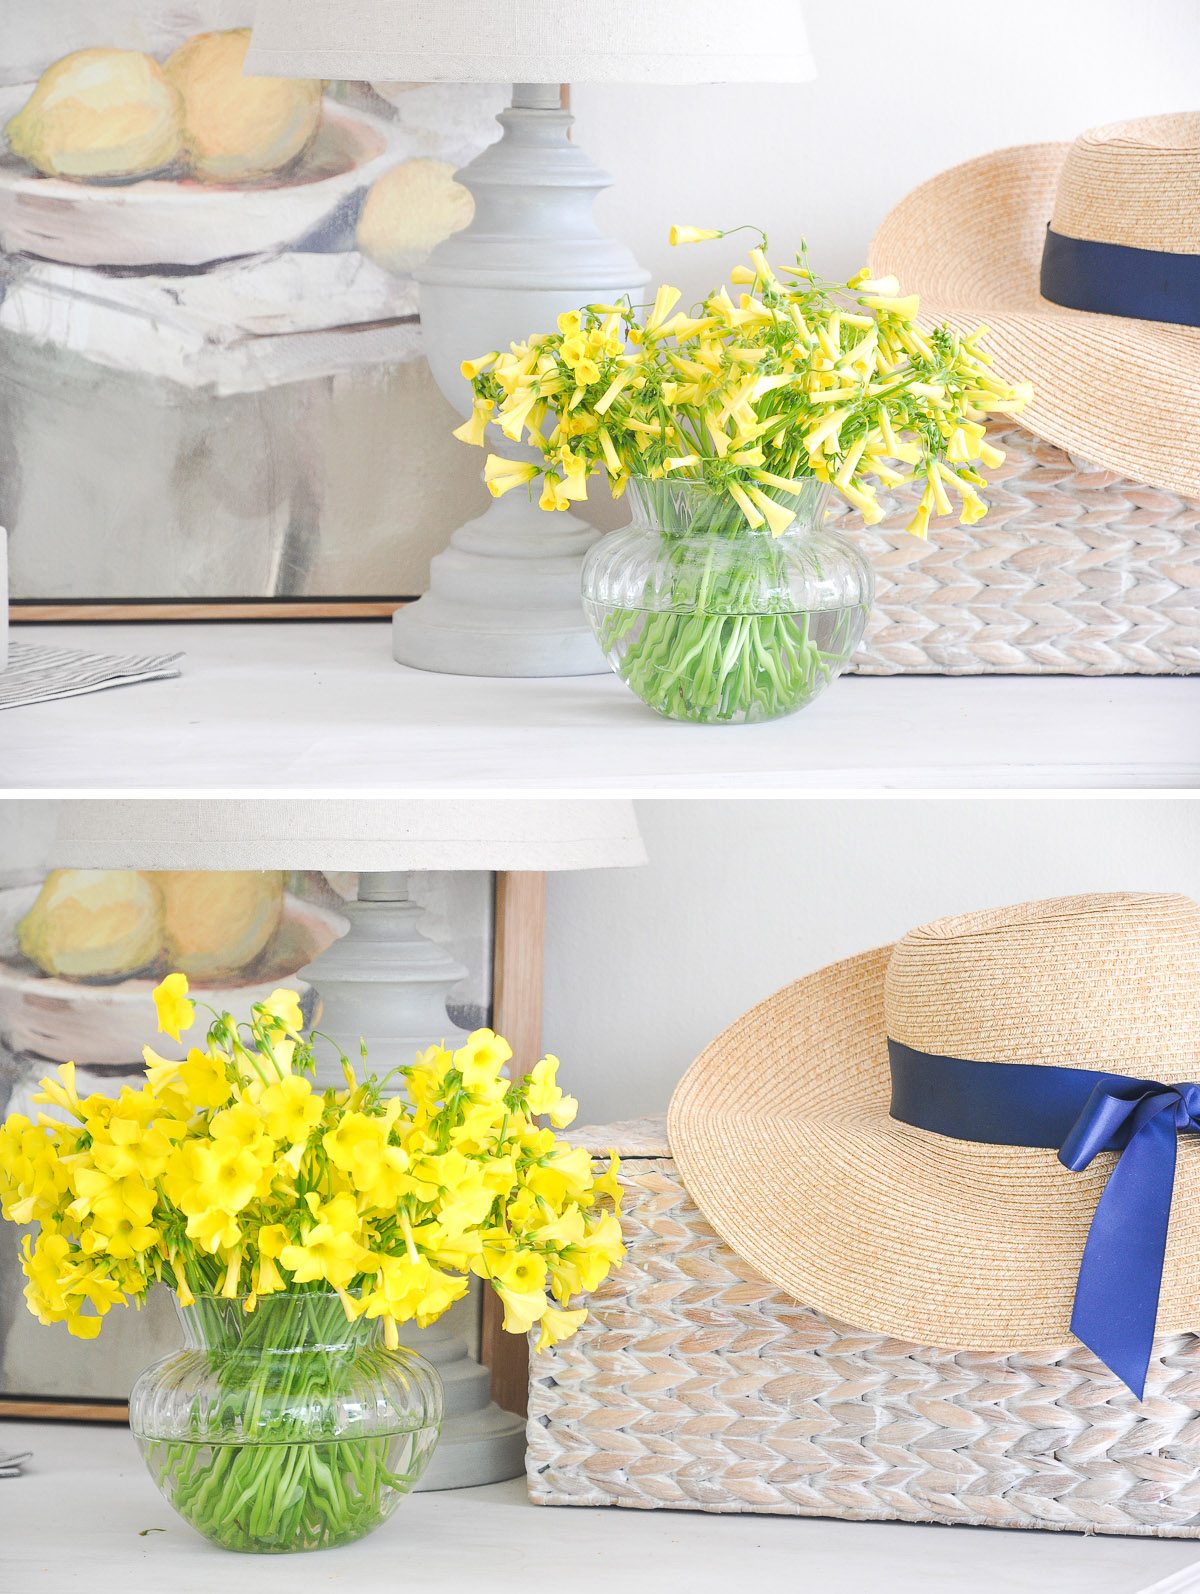 Spring Decoration Ideas for Entryway Console Table | DIY Spring Decor | yellow clover flower